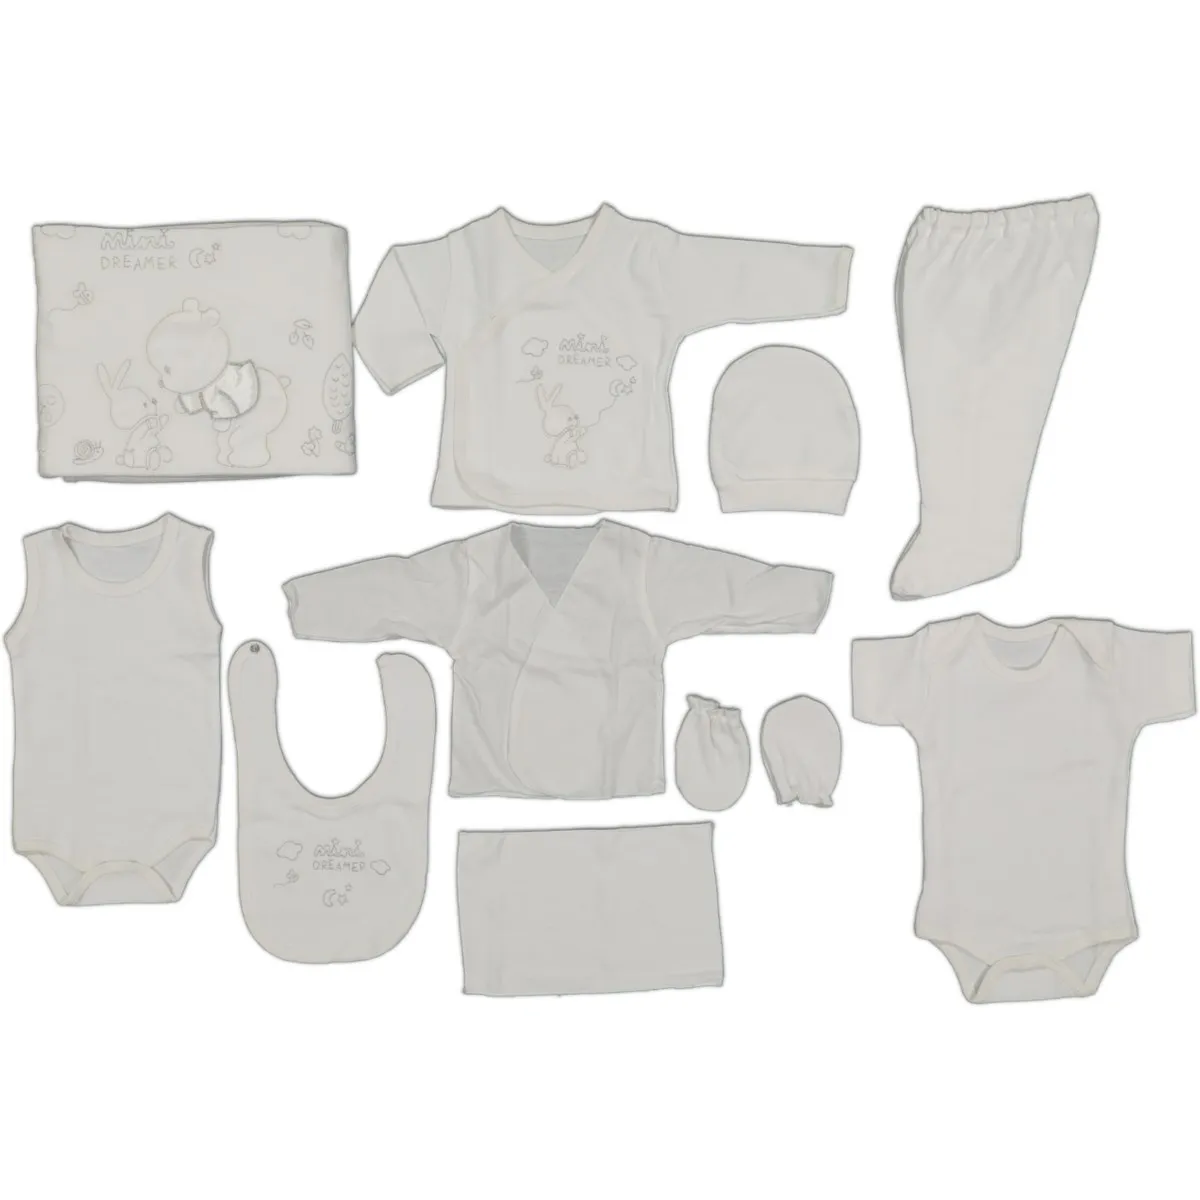 

Jaju Baby, 10 Pieces, Mini Dreamer Patterned Embroidered White Color Hospital Outfit Set